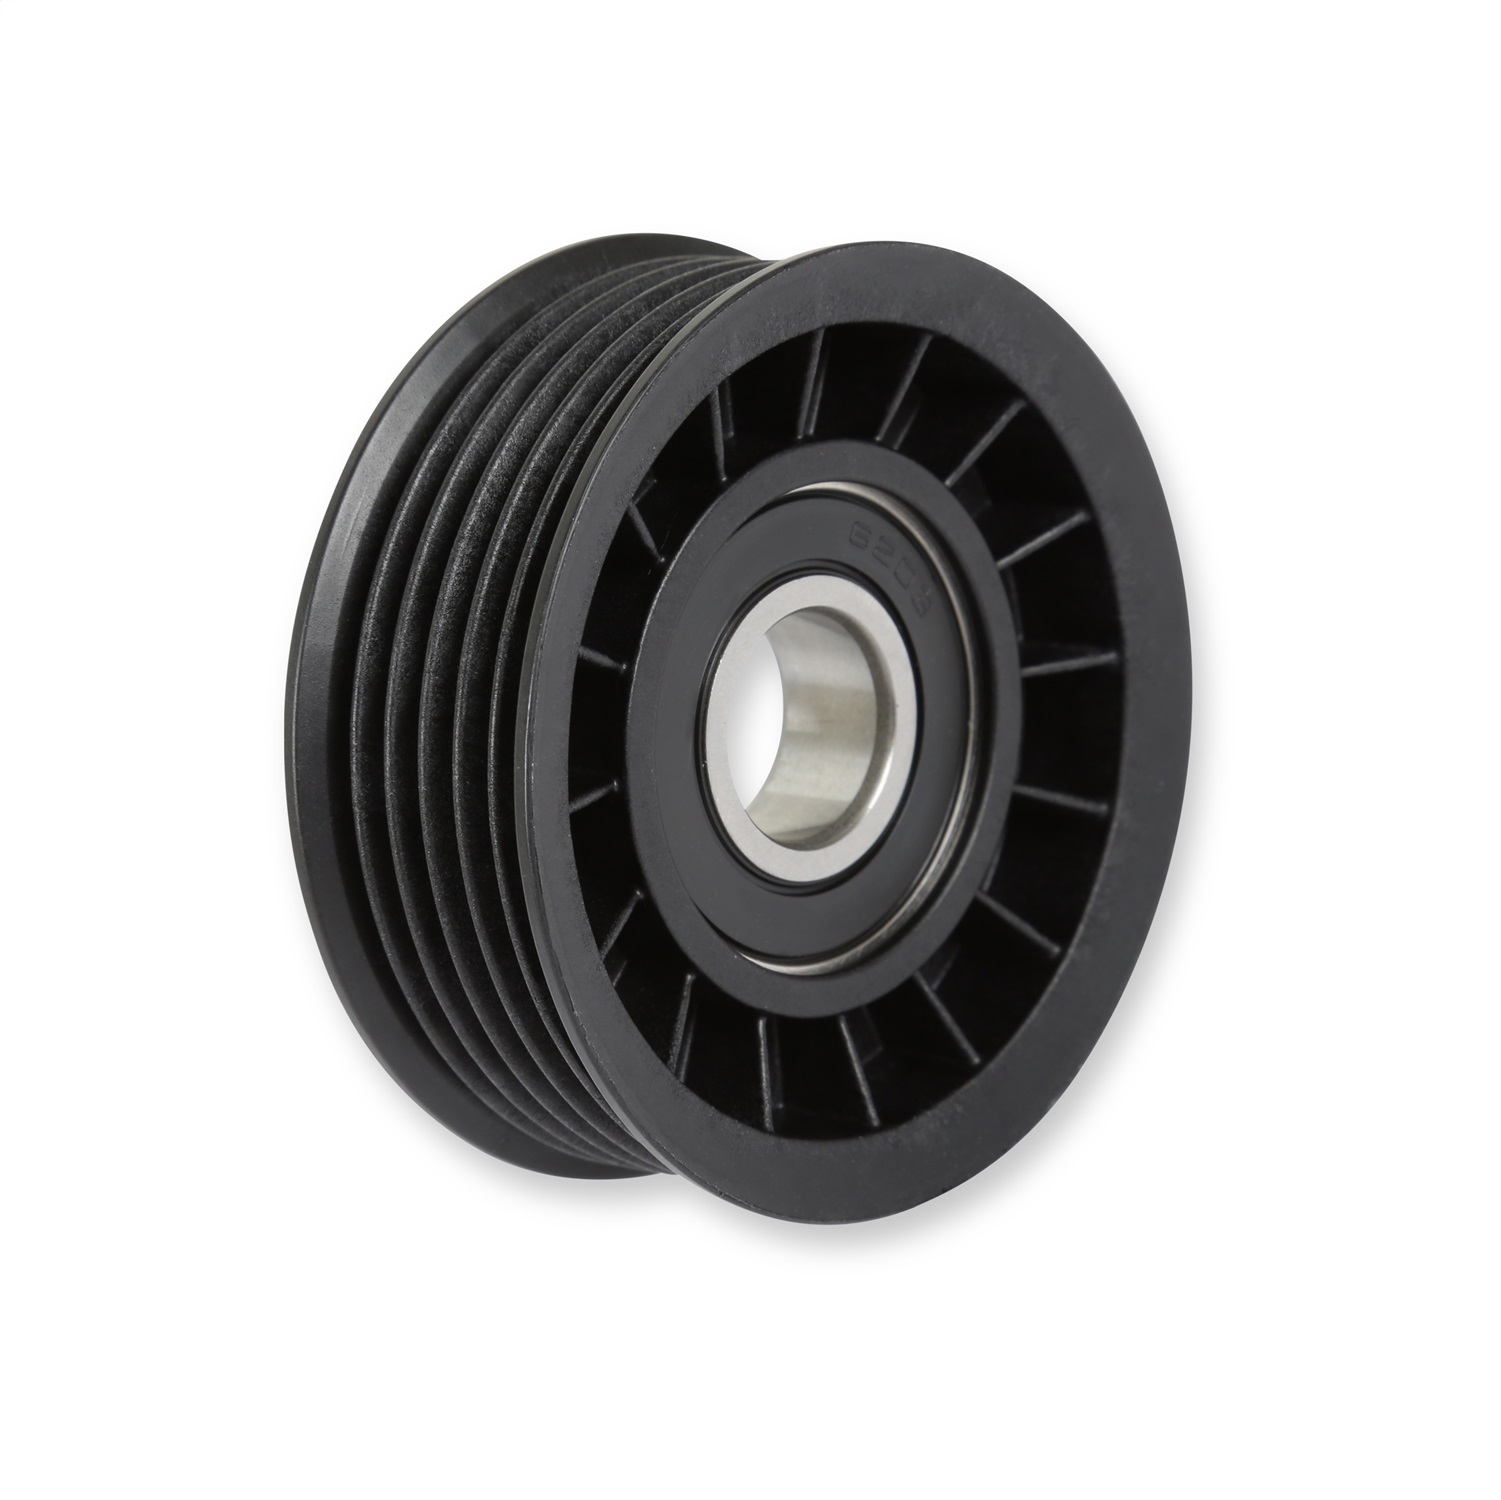 Holley Performance 97-344 Holley Idler Pulley